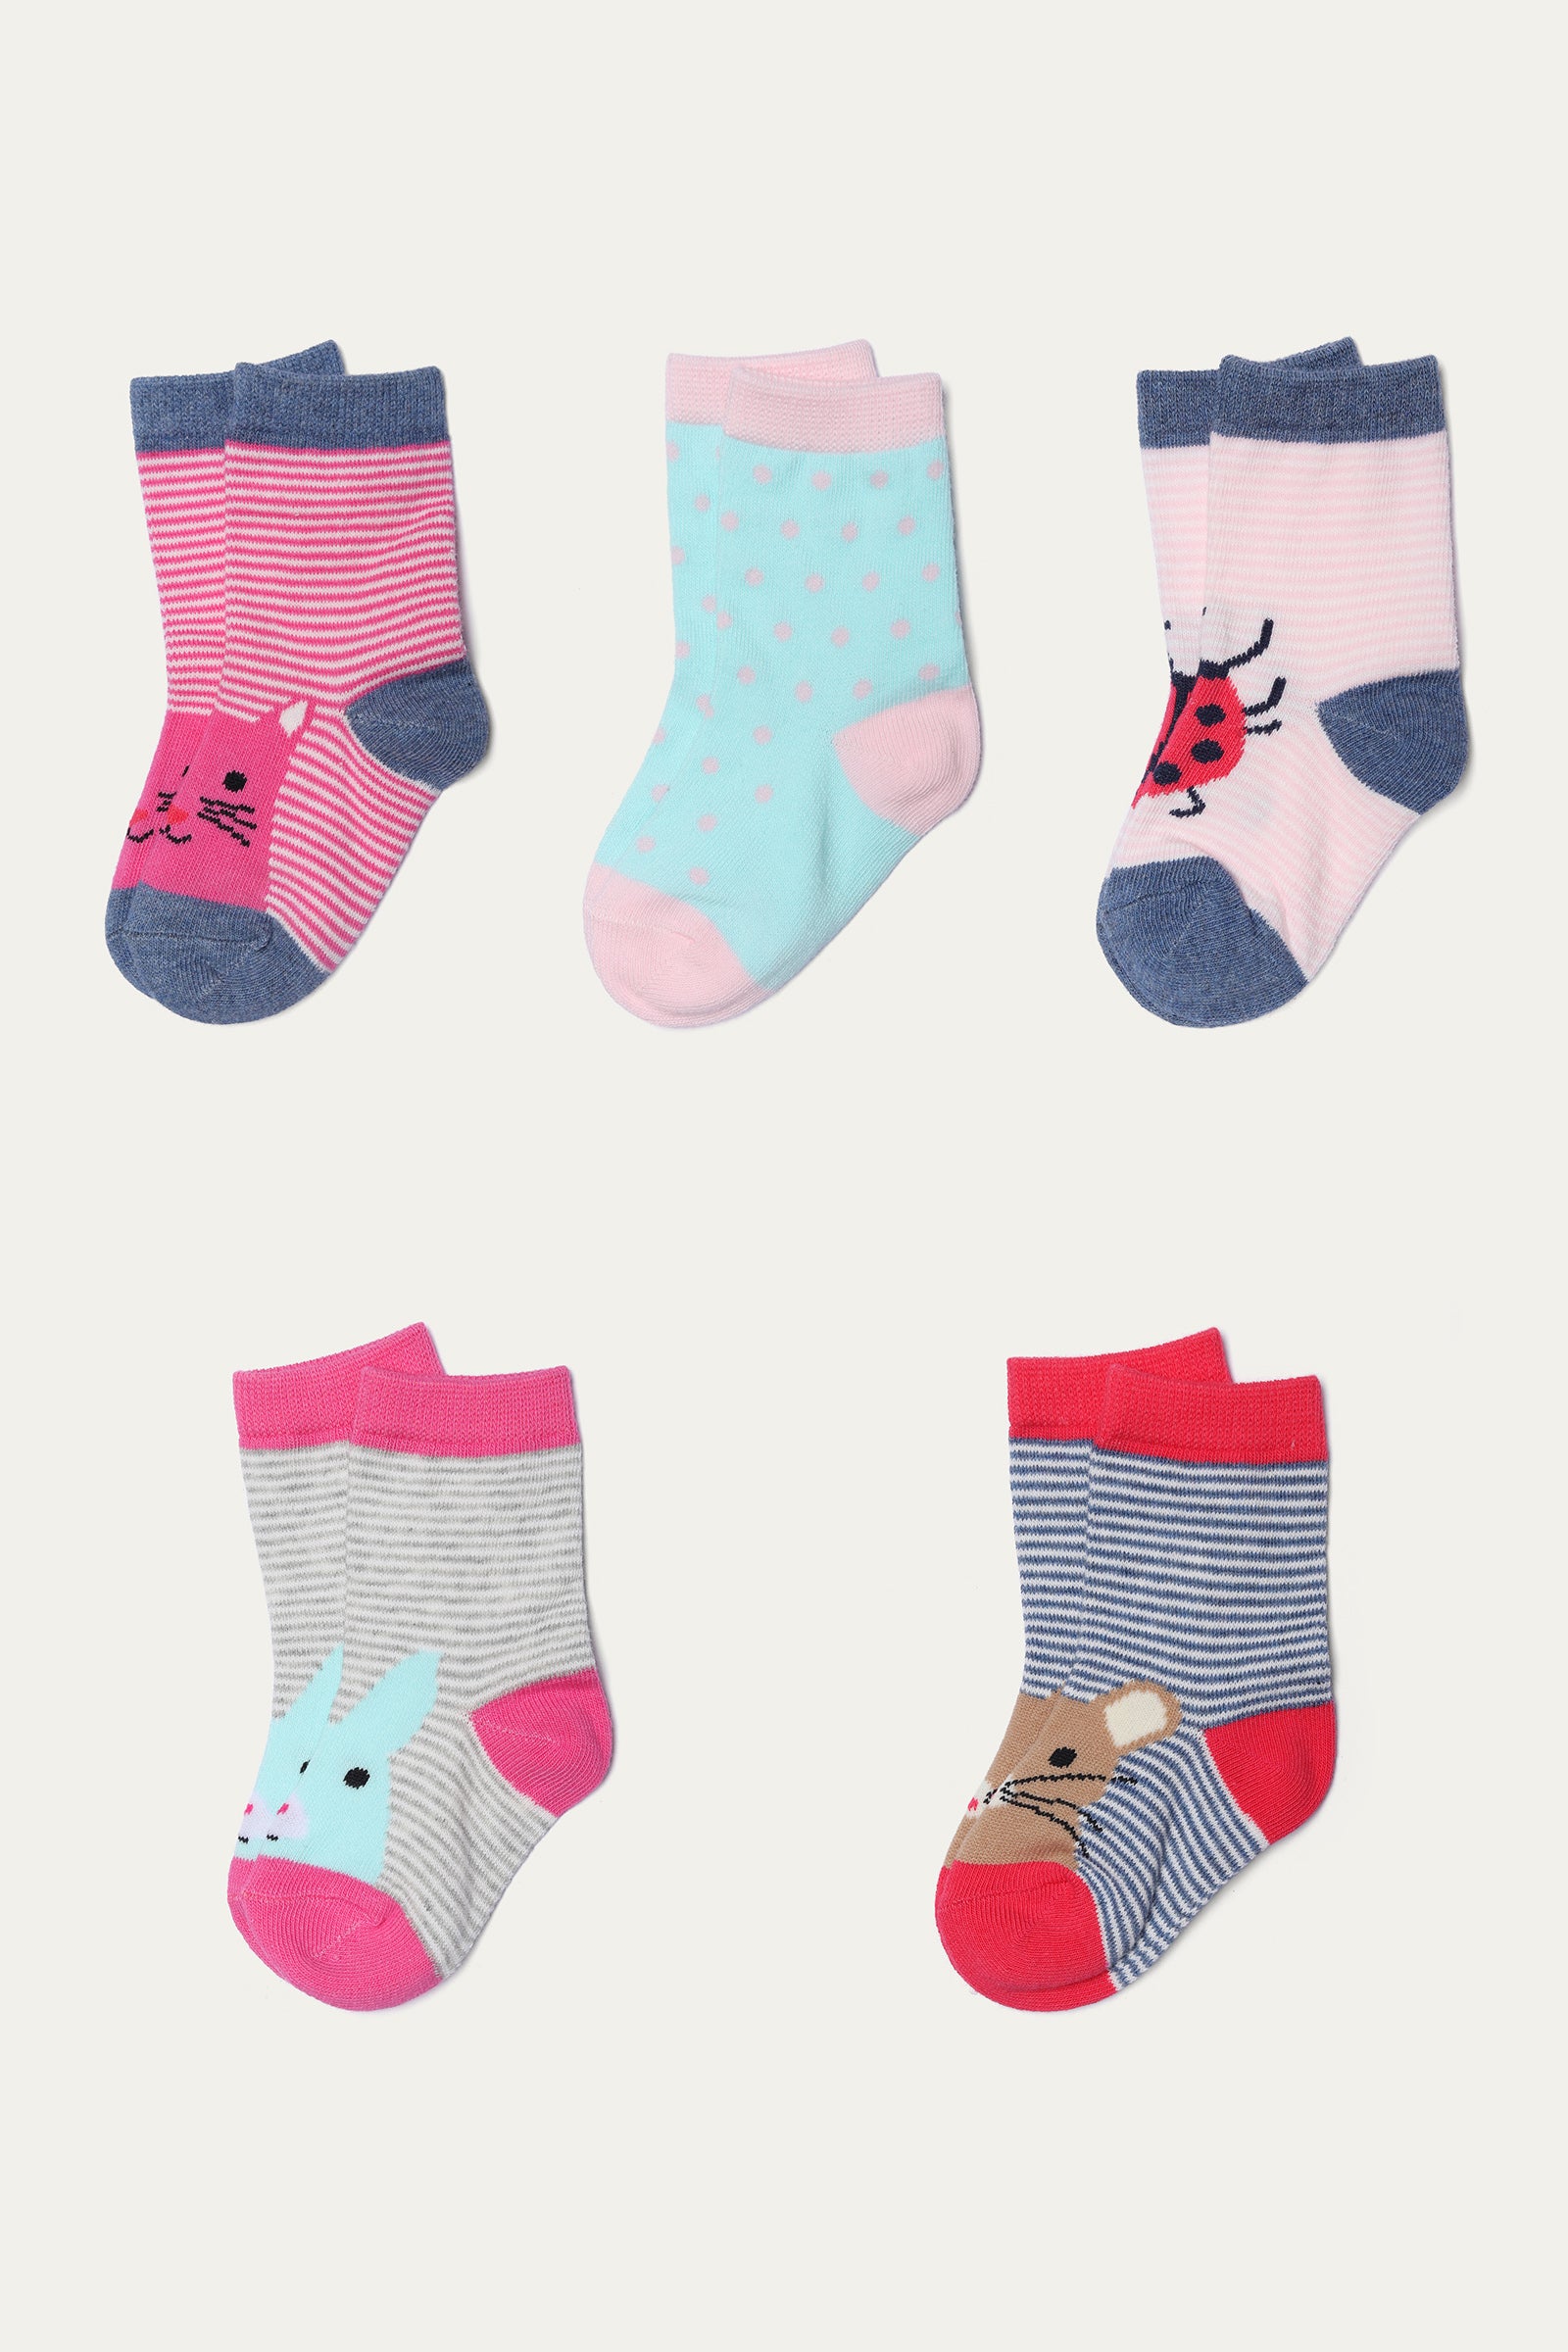 Socks Pack 5Pair - Soft Cotton/Polyester/Elastane | Assorted - Best Kids Clothing Brands In Pakistan Online|Minnie Minors